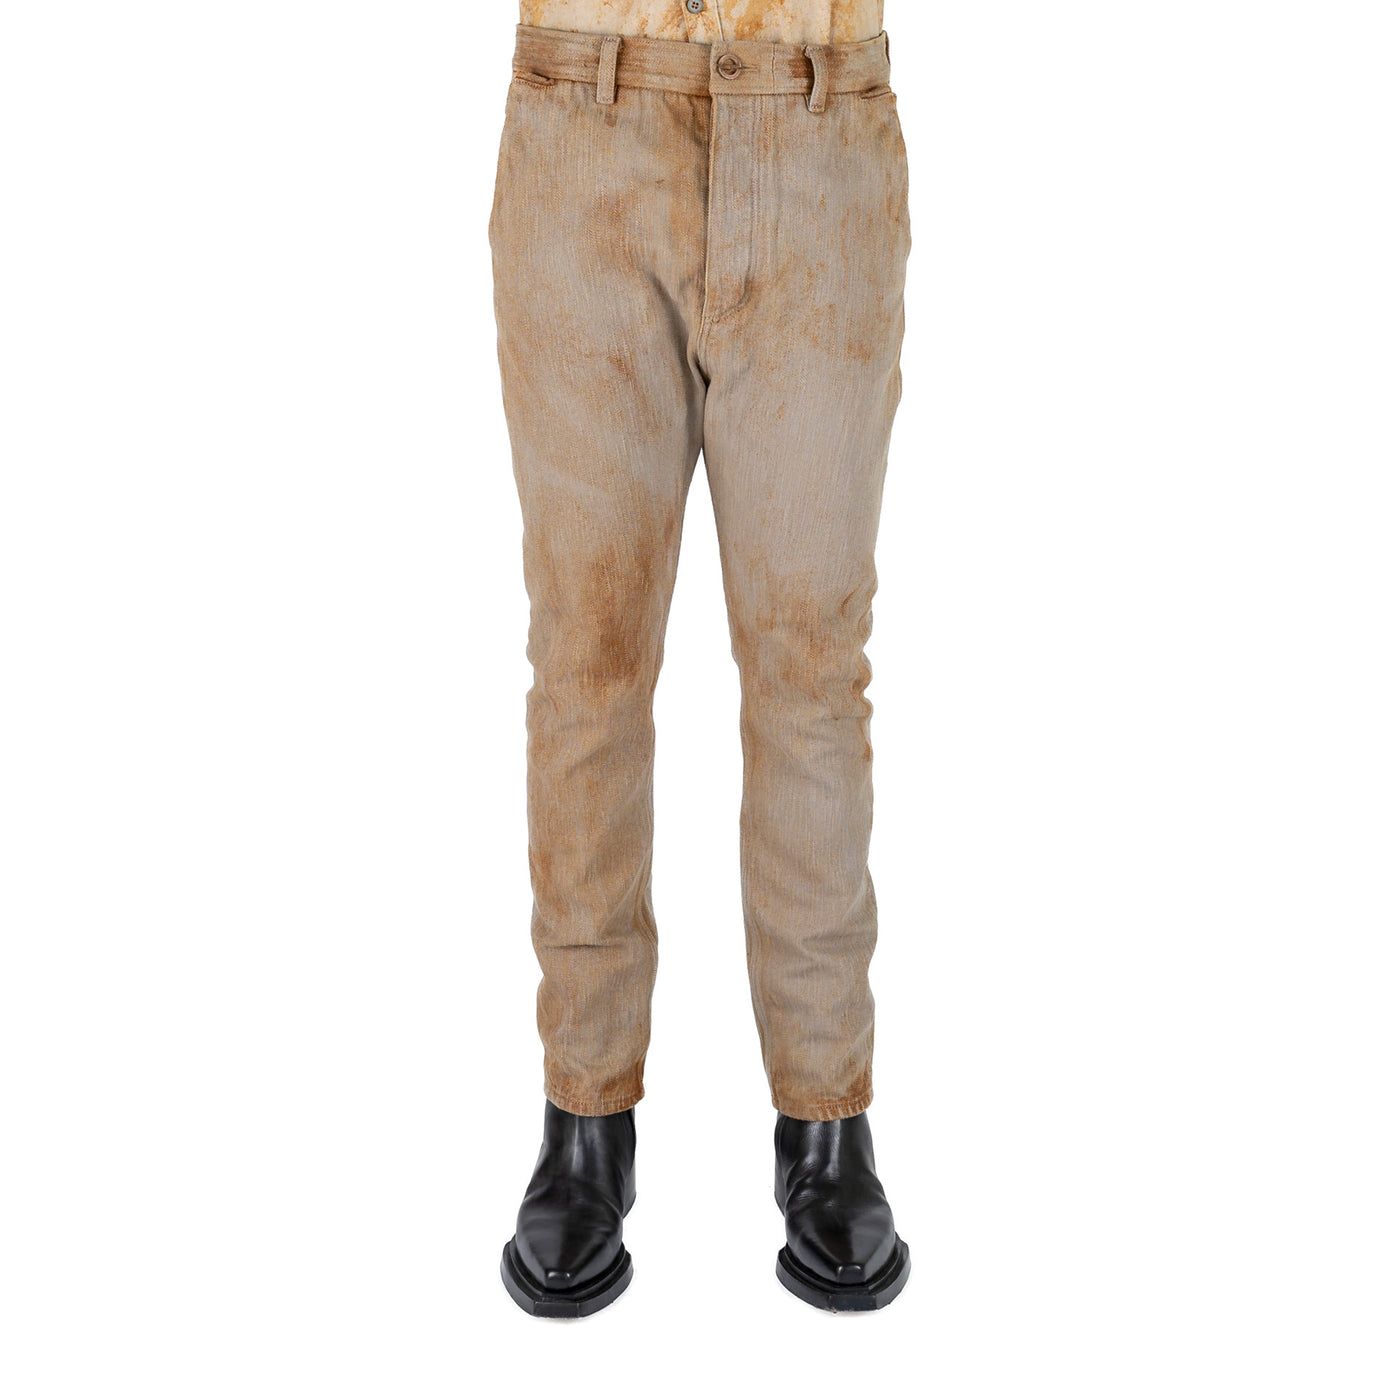 Irony Jeans & Trousers - IRONY Shorts for Men #onlineshopping  #outfitoftheday #shopping #indigo #summer #fashionstyle #dress #instagram  #art #tshirt #look #s #shoes #blue #follow #photooftheday #shirt #denimhead  #denimlovers #sale #pants #workwear ...